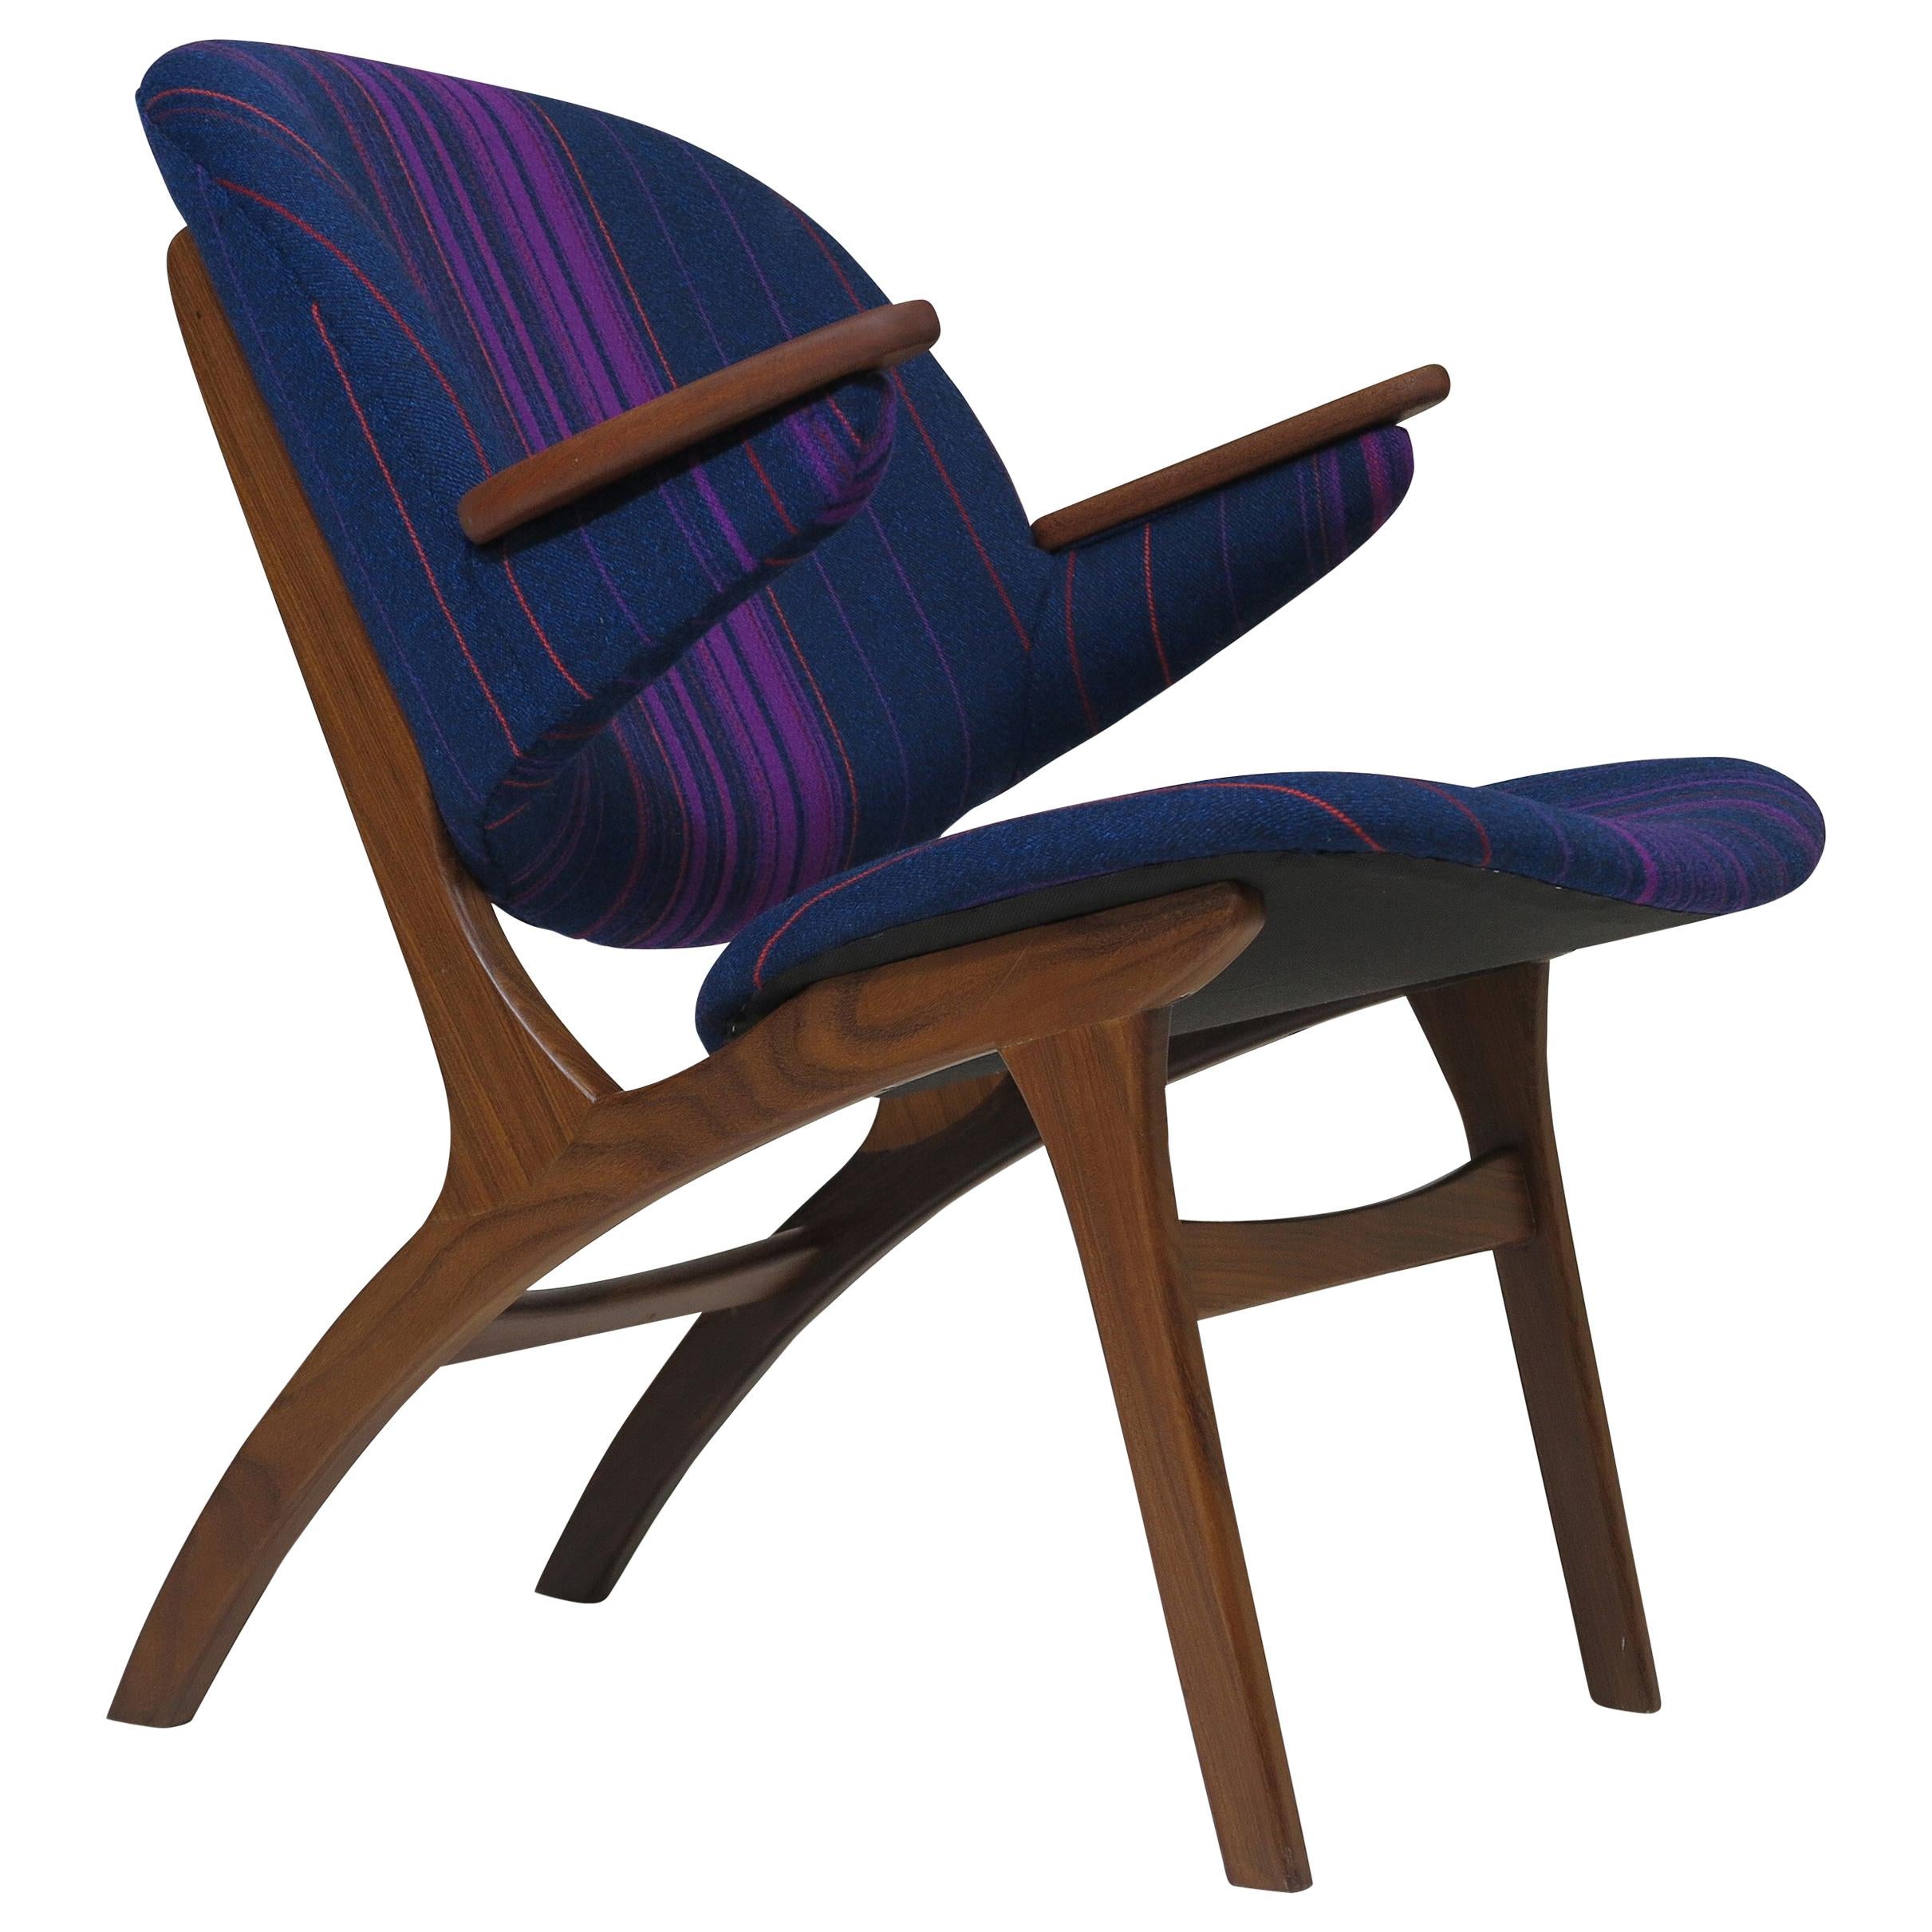 Pair of Edward Matthes for C.E. Matthes lounge chairs. Sculpted teak frame with comfortable curved back rest and teak arms, finely restored and reupholstered in an eye-catching striped wool fabric over natural latex foam.